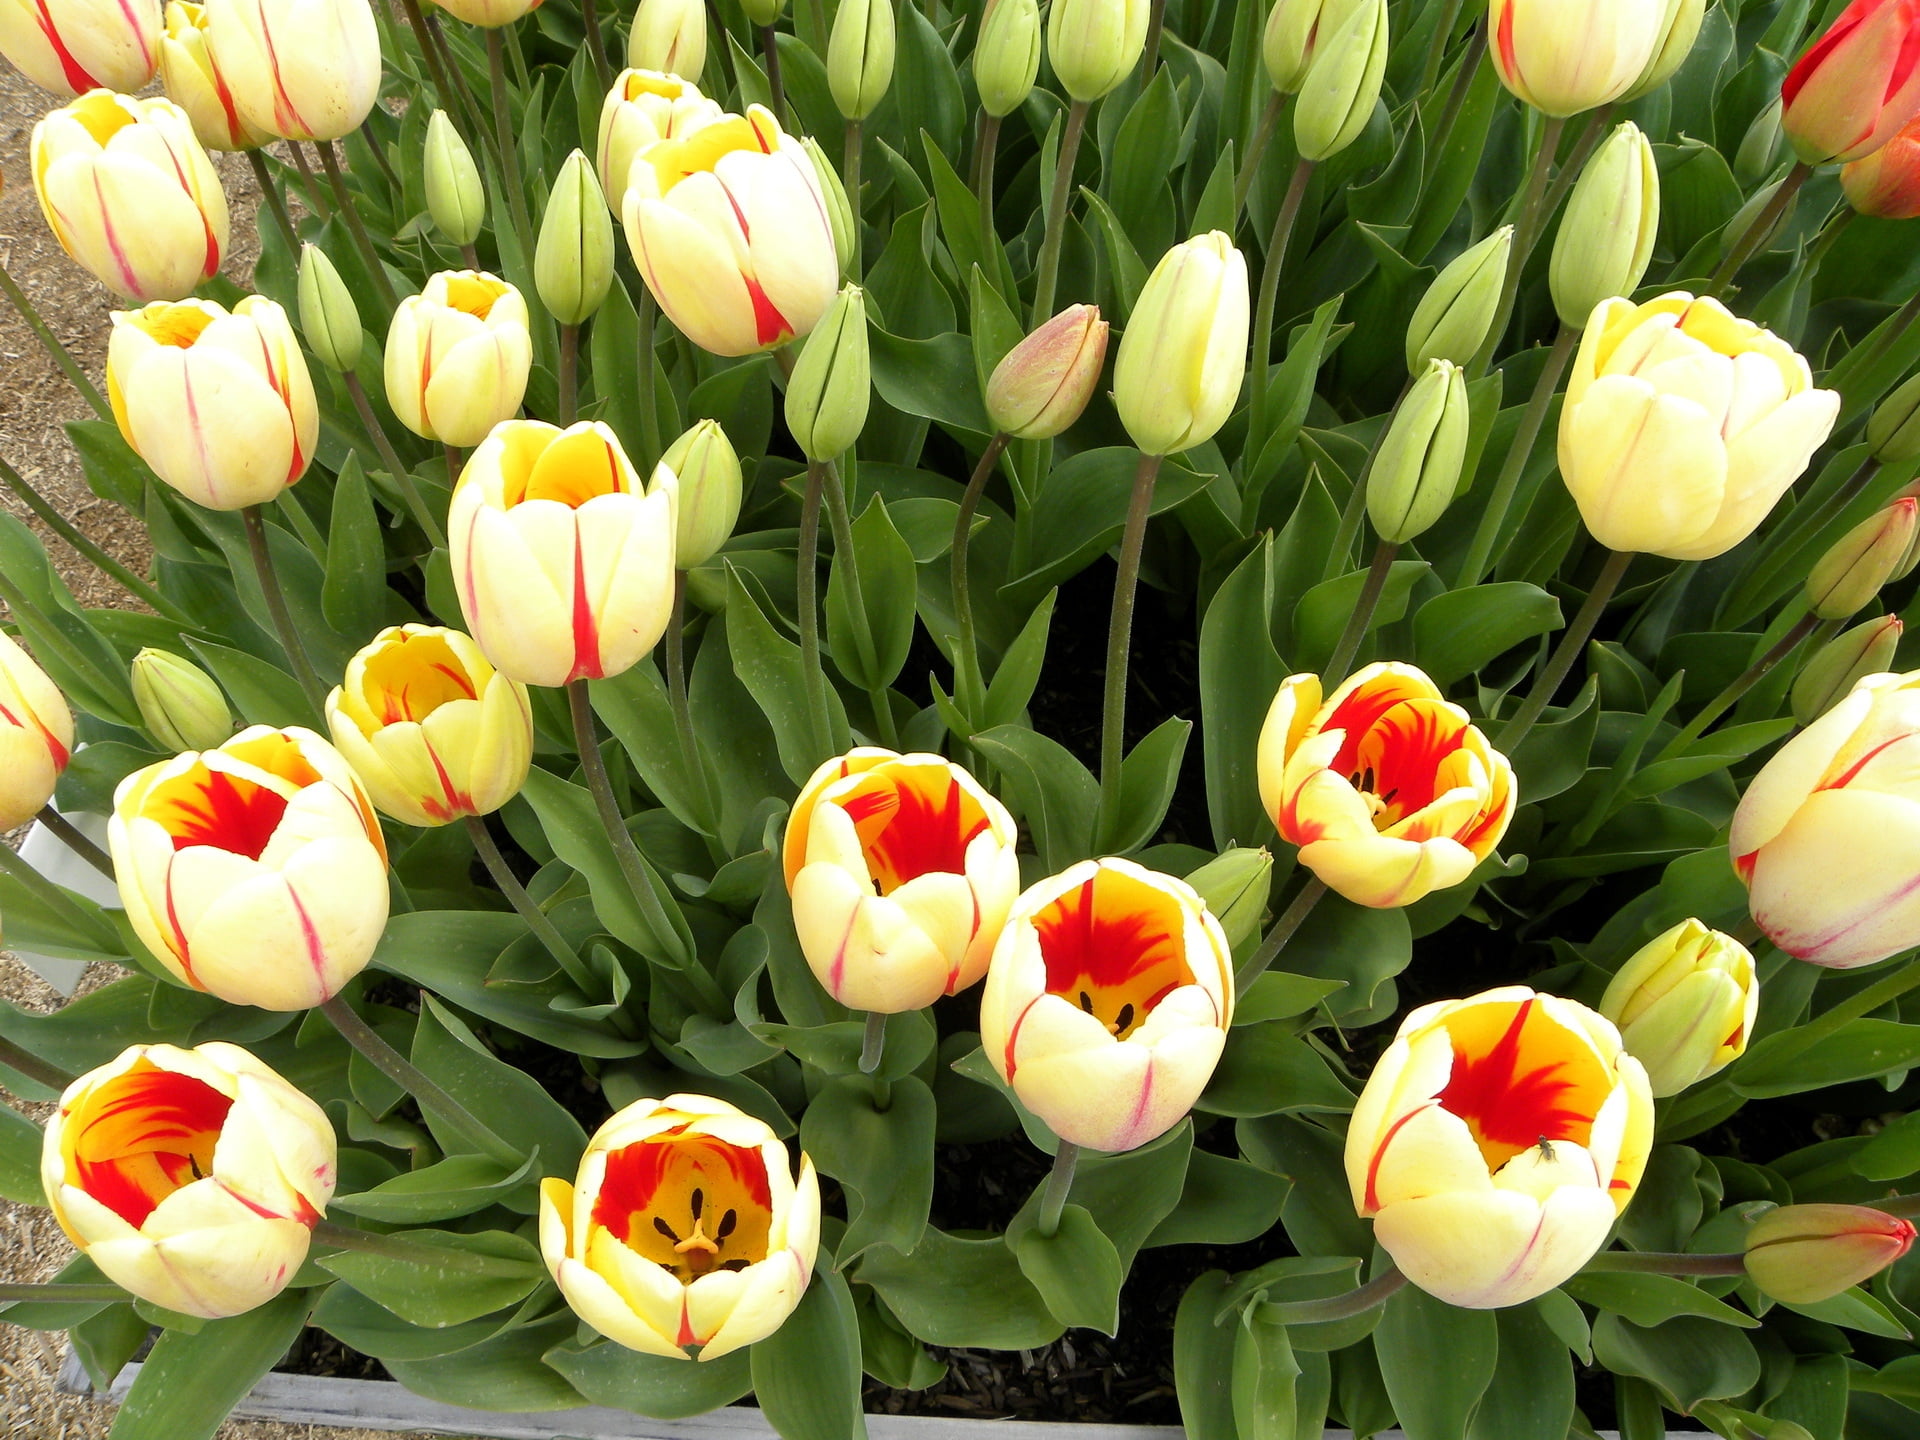 macro photography of yellow-and-red tulips